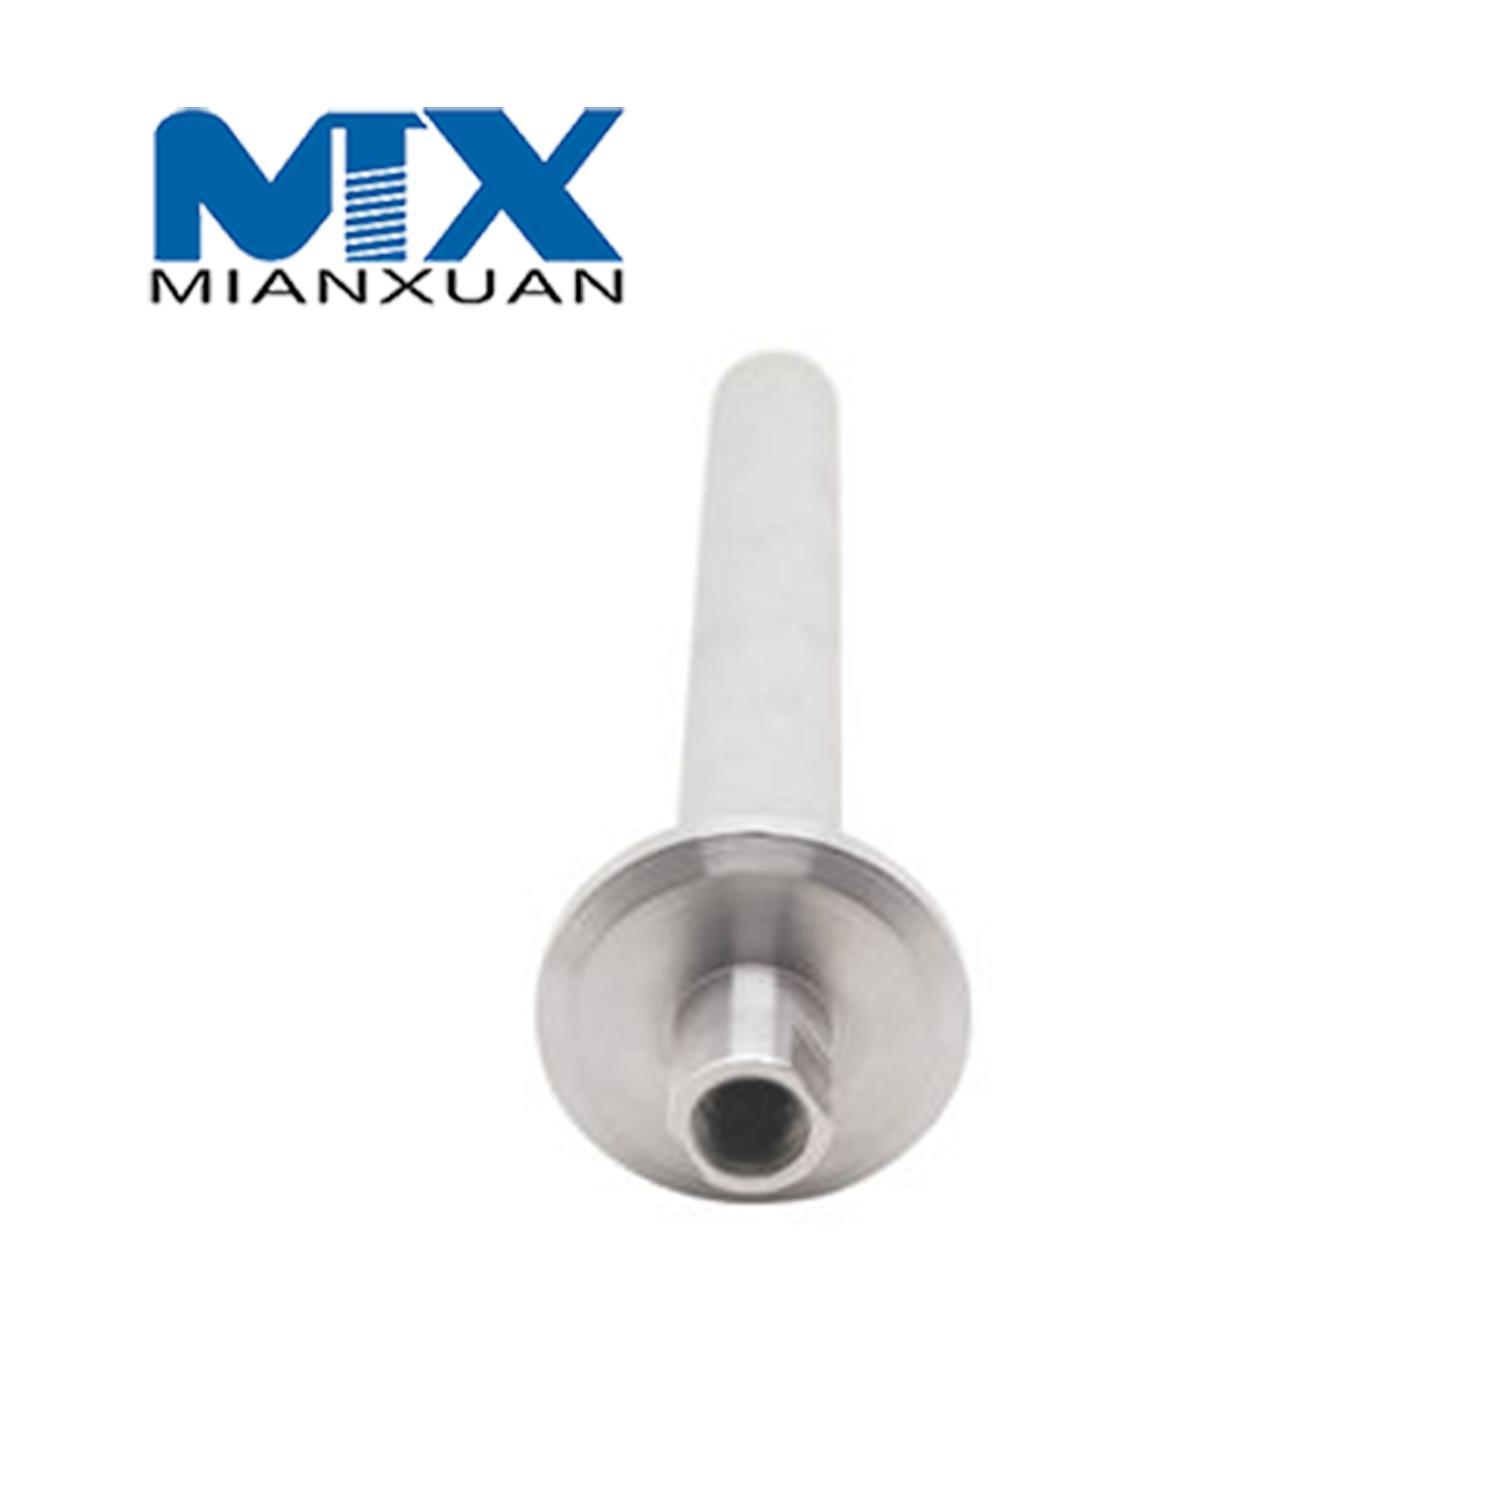 316L Carbonation Stone/Diffusion Stone 2 Um Fittings for Home Barb Porous Metal